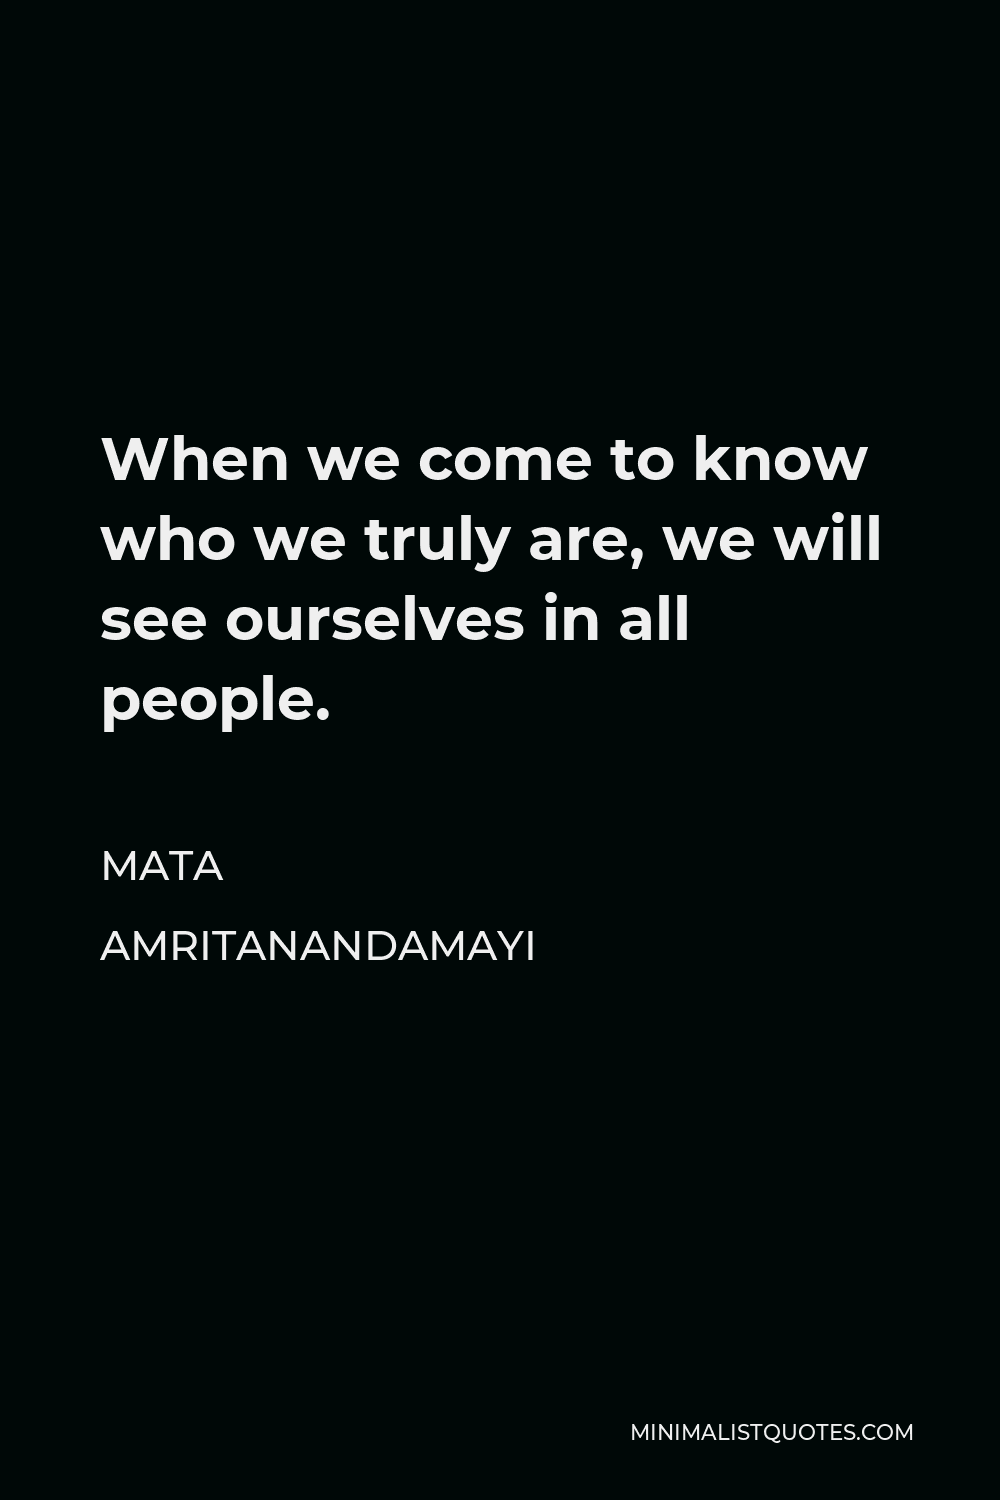 Mata Amritanandamayi Quote - When we come to know who we truly are, we will see ourselves in all people.